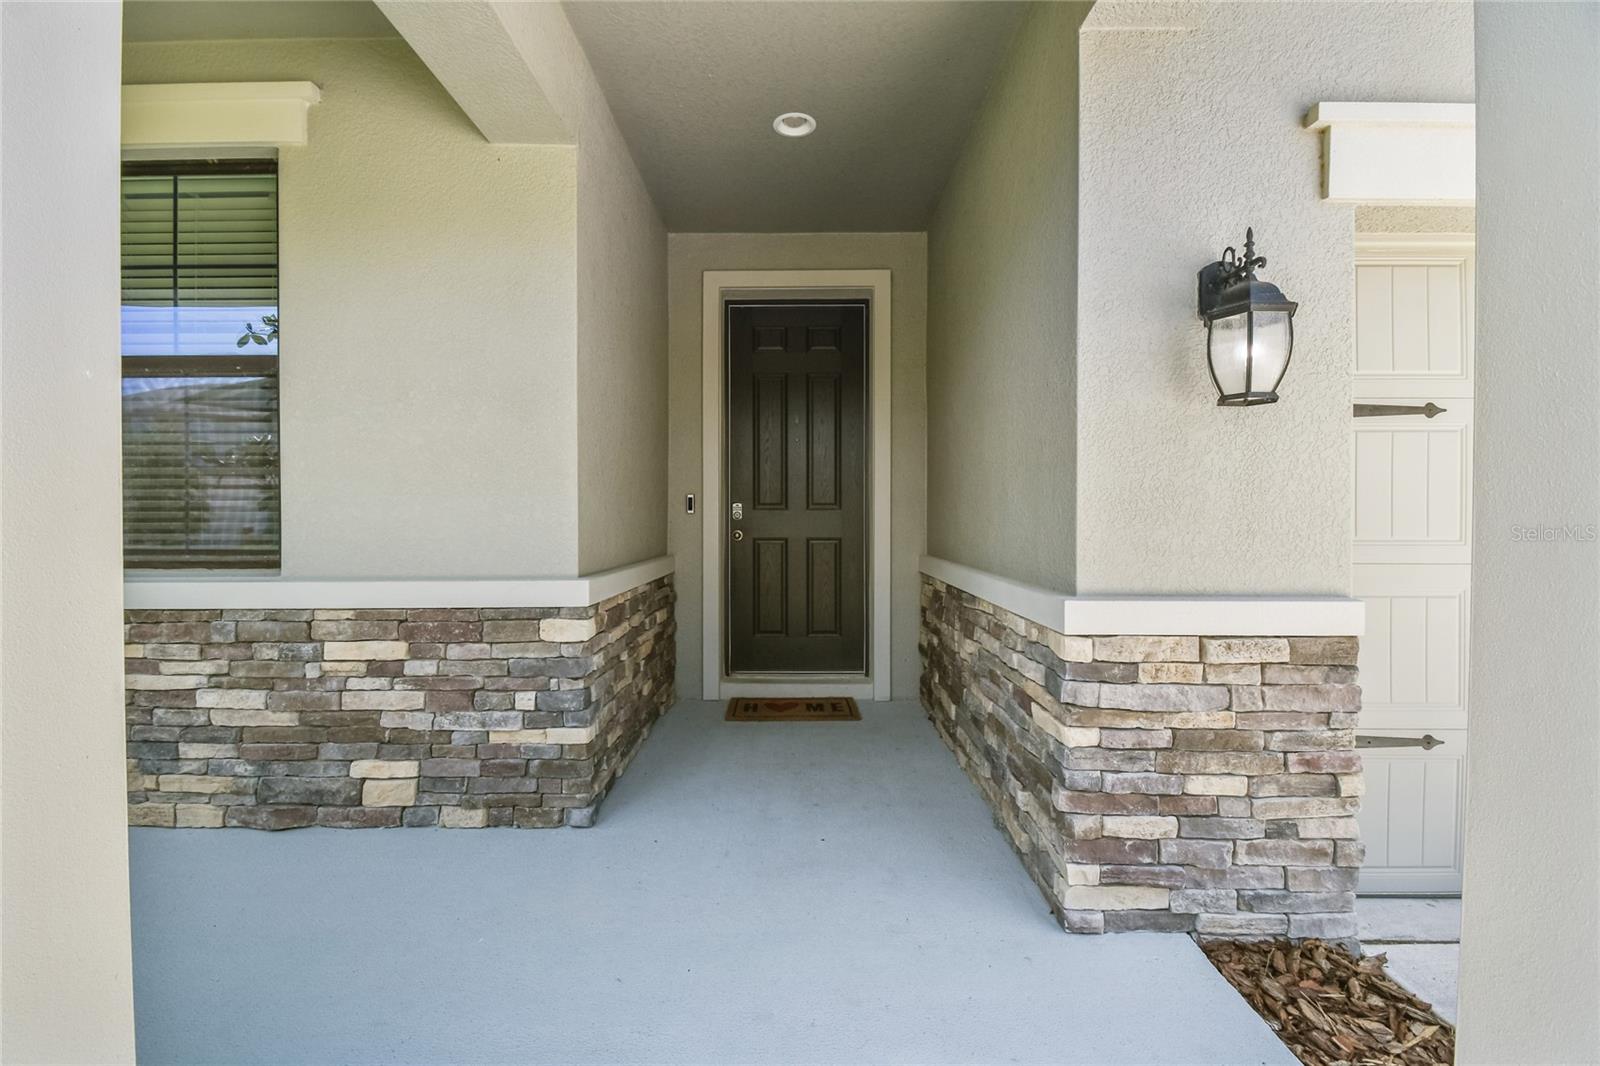 Entrance from inside w/alcove on left to laundry/garage doors